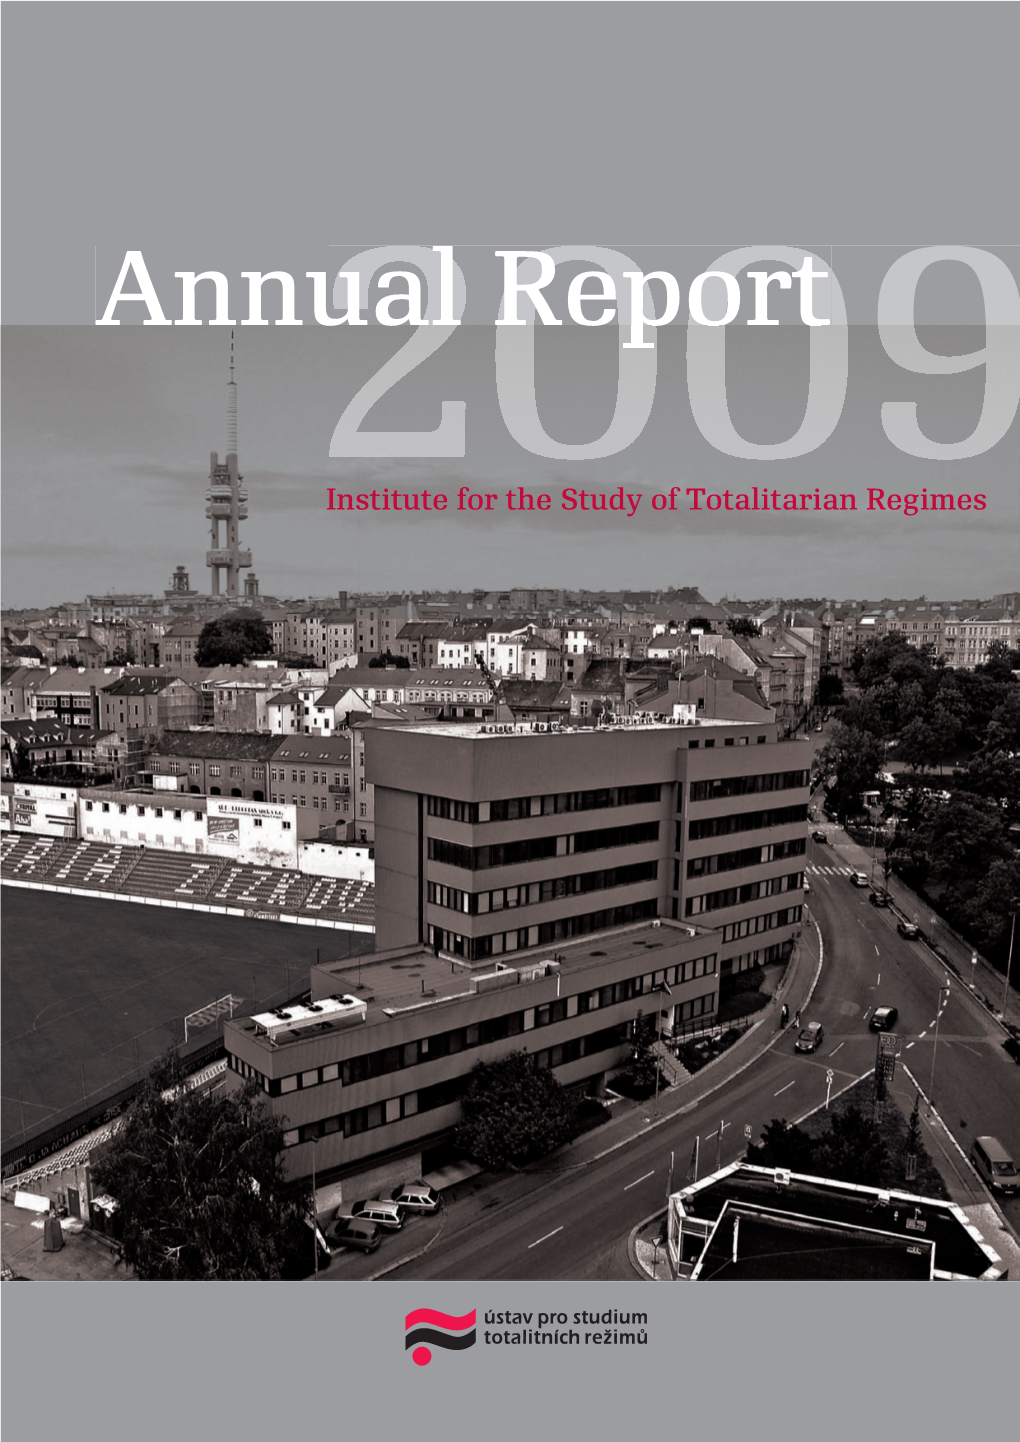 Annual Report of the Institute for the Study of Totalitarian Regimes for 2008